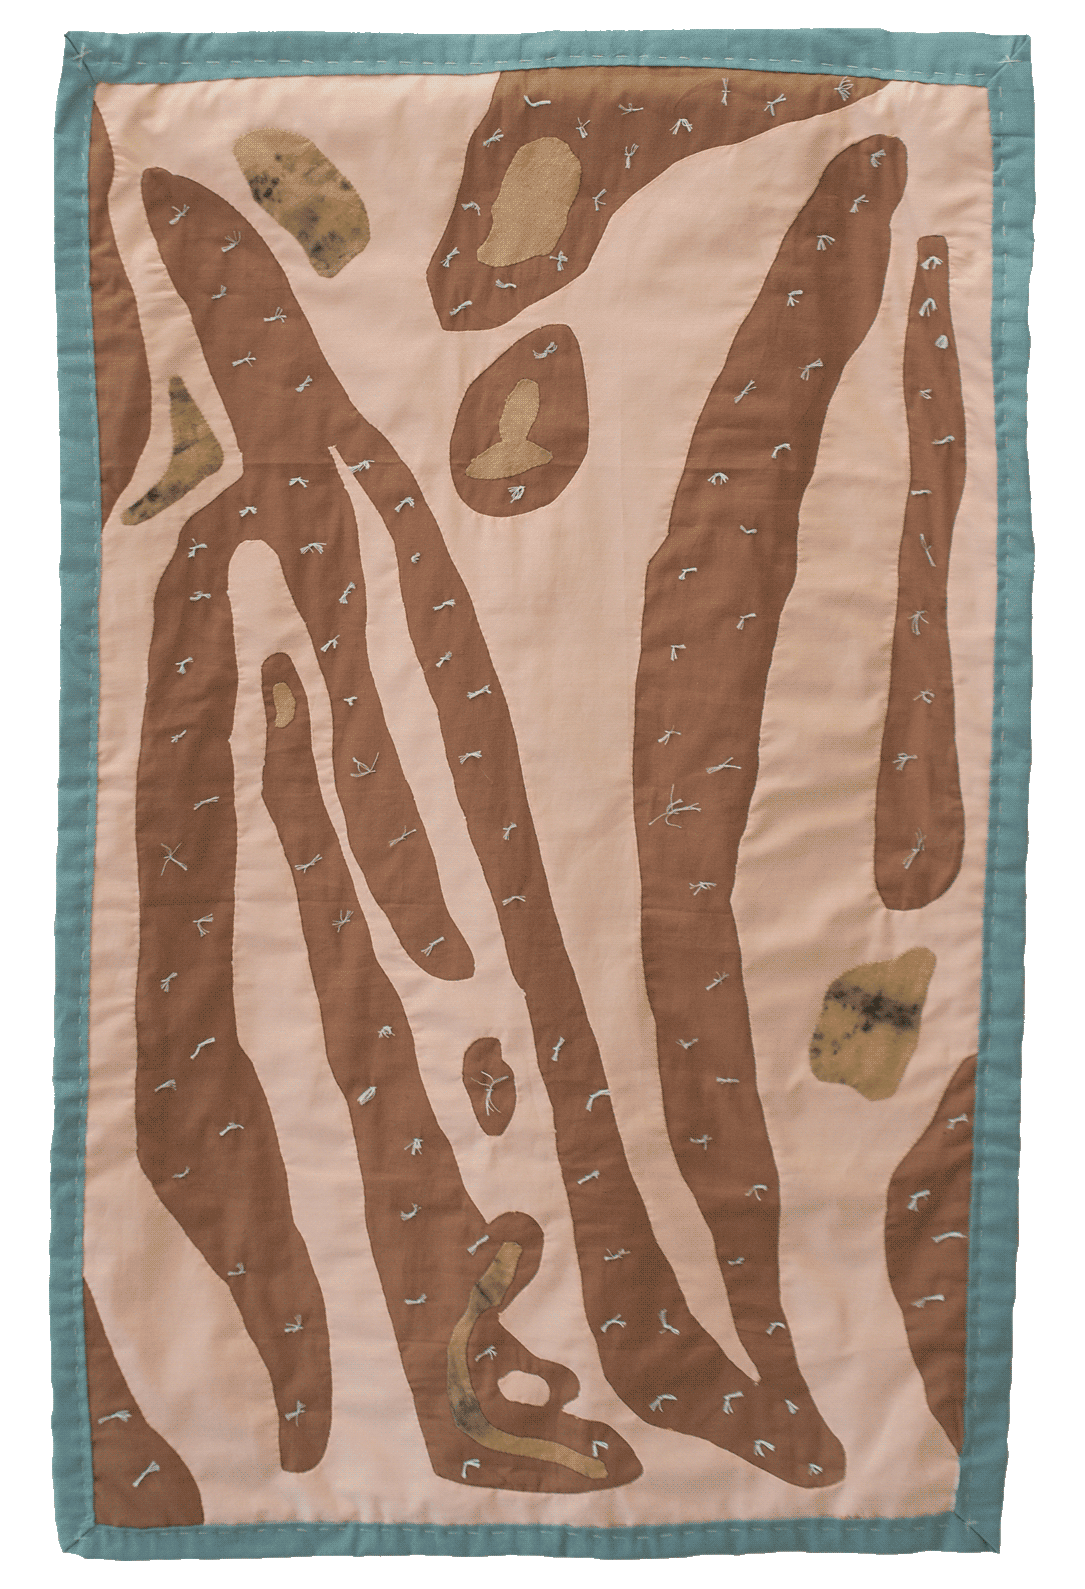 A peach colored quilt with brown organic shapes are scattered throughout 
                the surface of the quilt along with white knots. The quilt has a light blue binding.